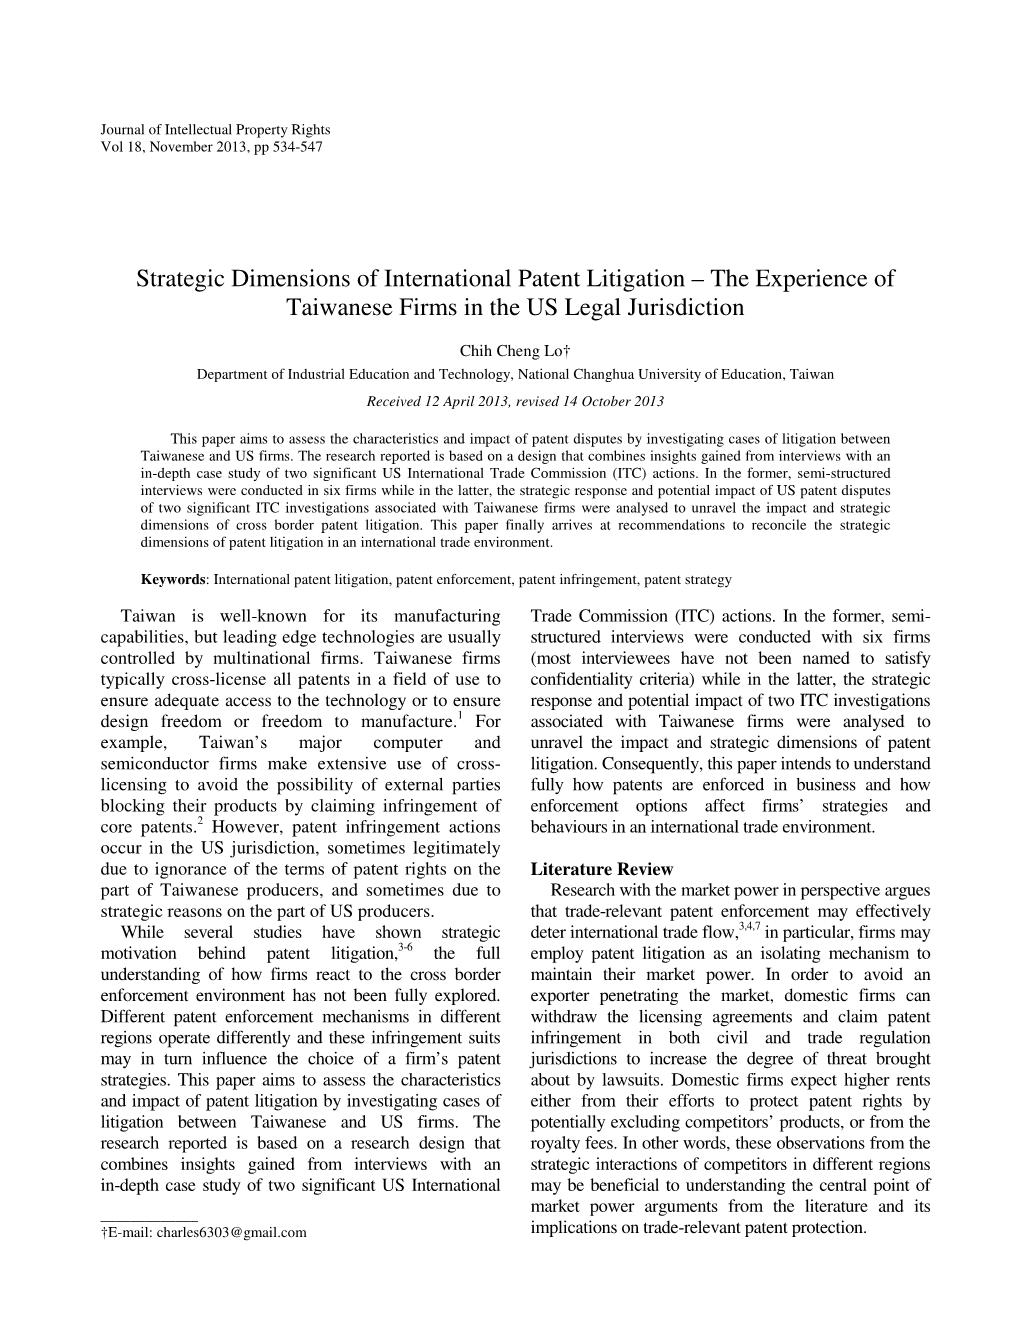 Strategic Dimensions of International Patent Litigation – the Experience of Taiwanese Firms in the US Legal Jurisdiction